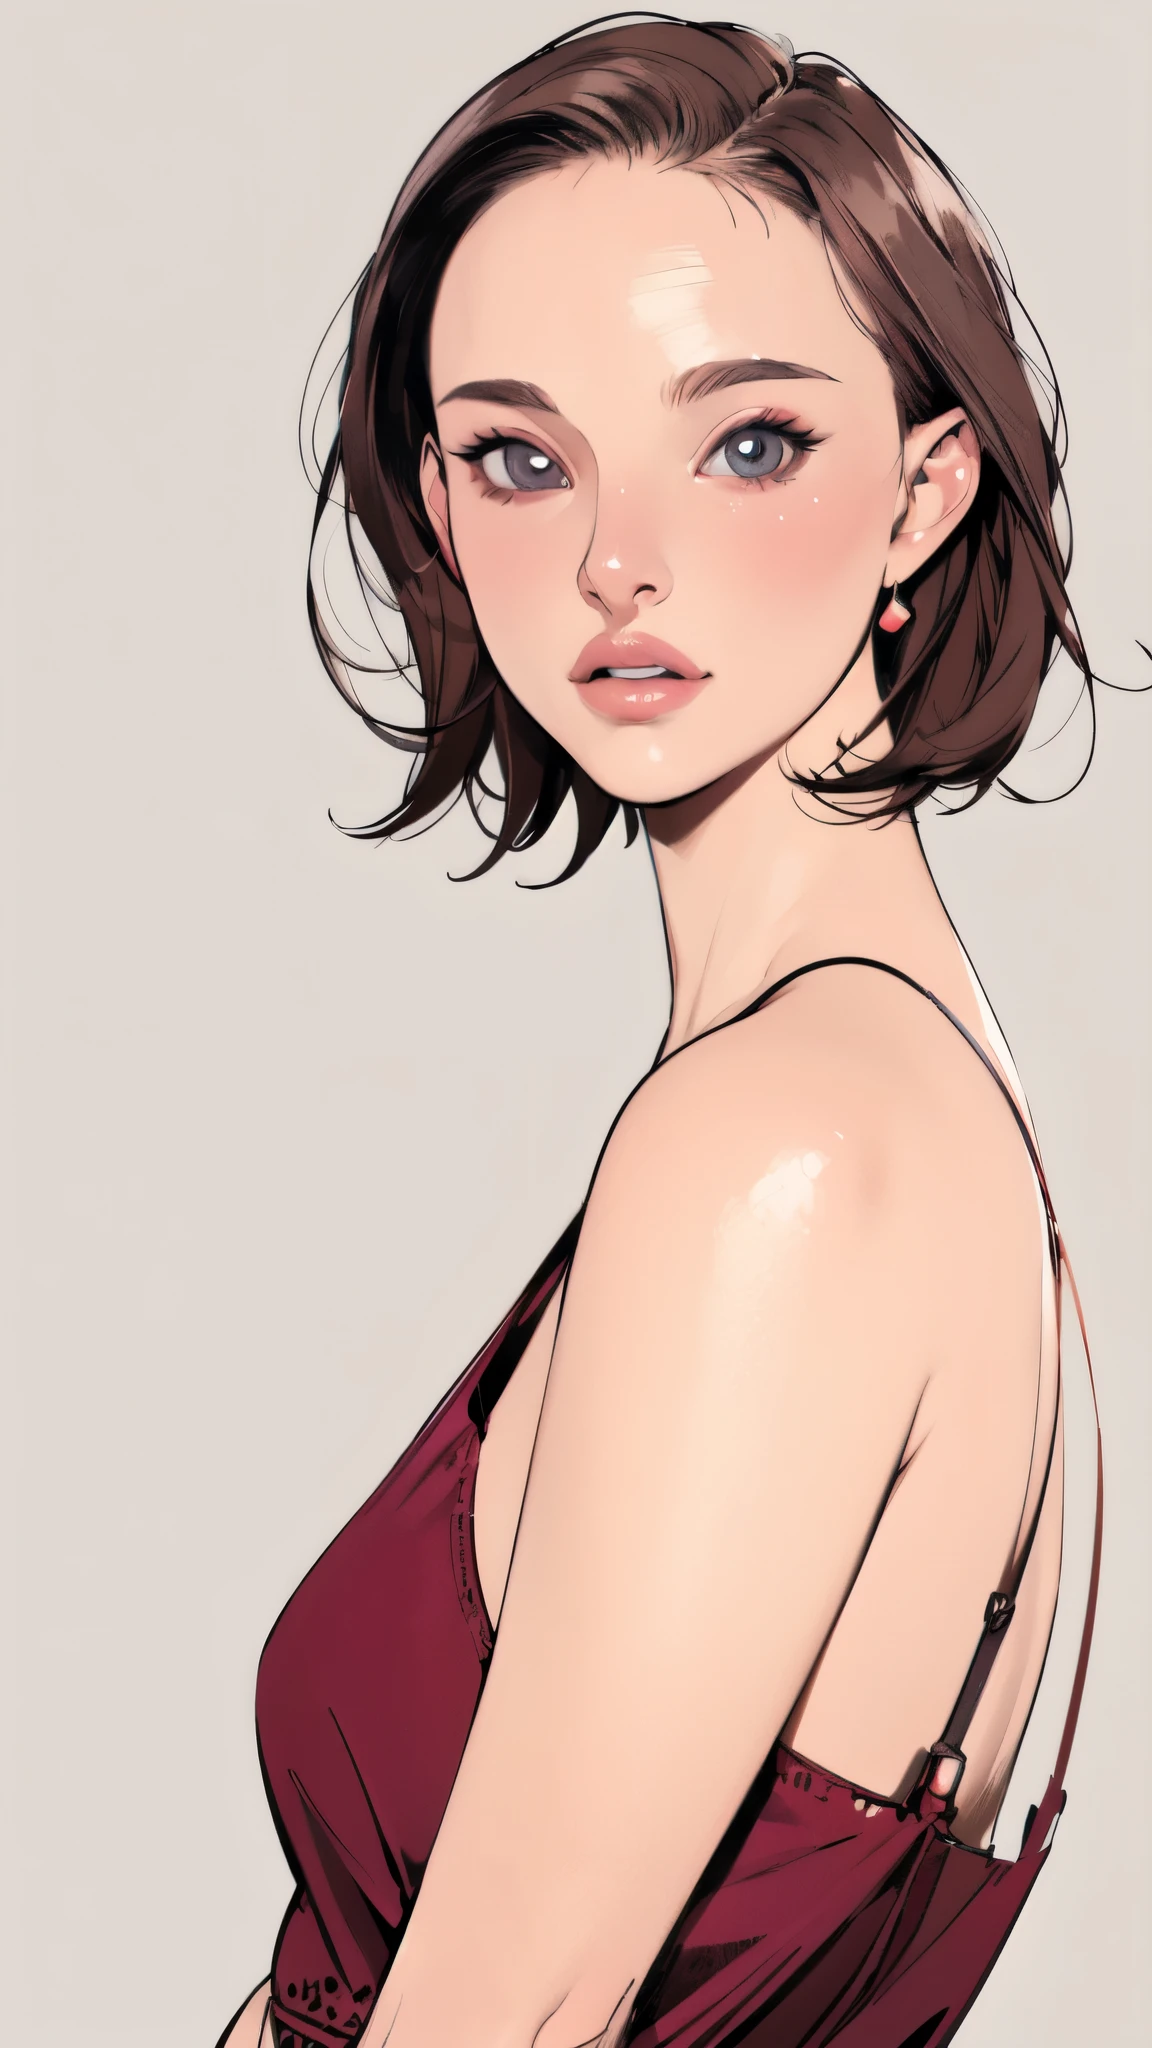 (masterpiece:1.2, Highest quality),8K,wallpaper,(An illustration),(Natalie Portman), Upper body close-up,front,short hair,Wearing a bold dress,Perfect Eyes,Detailed face,,Cool woman